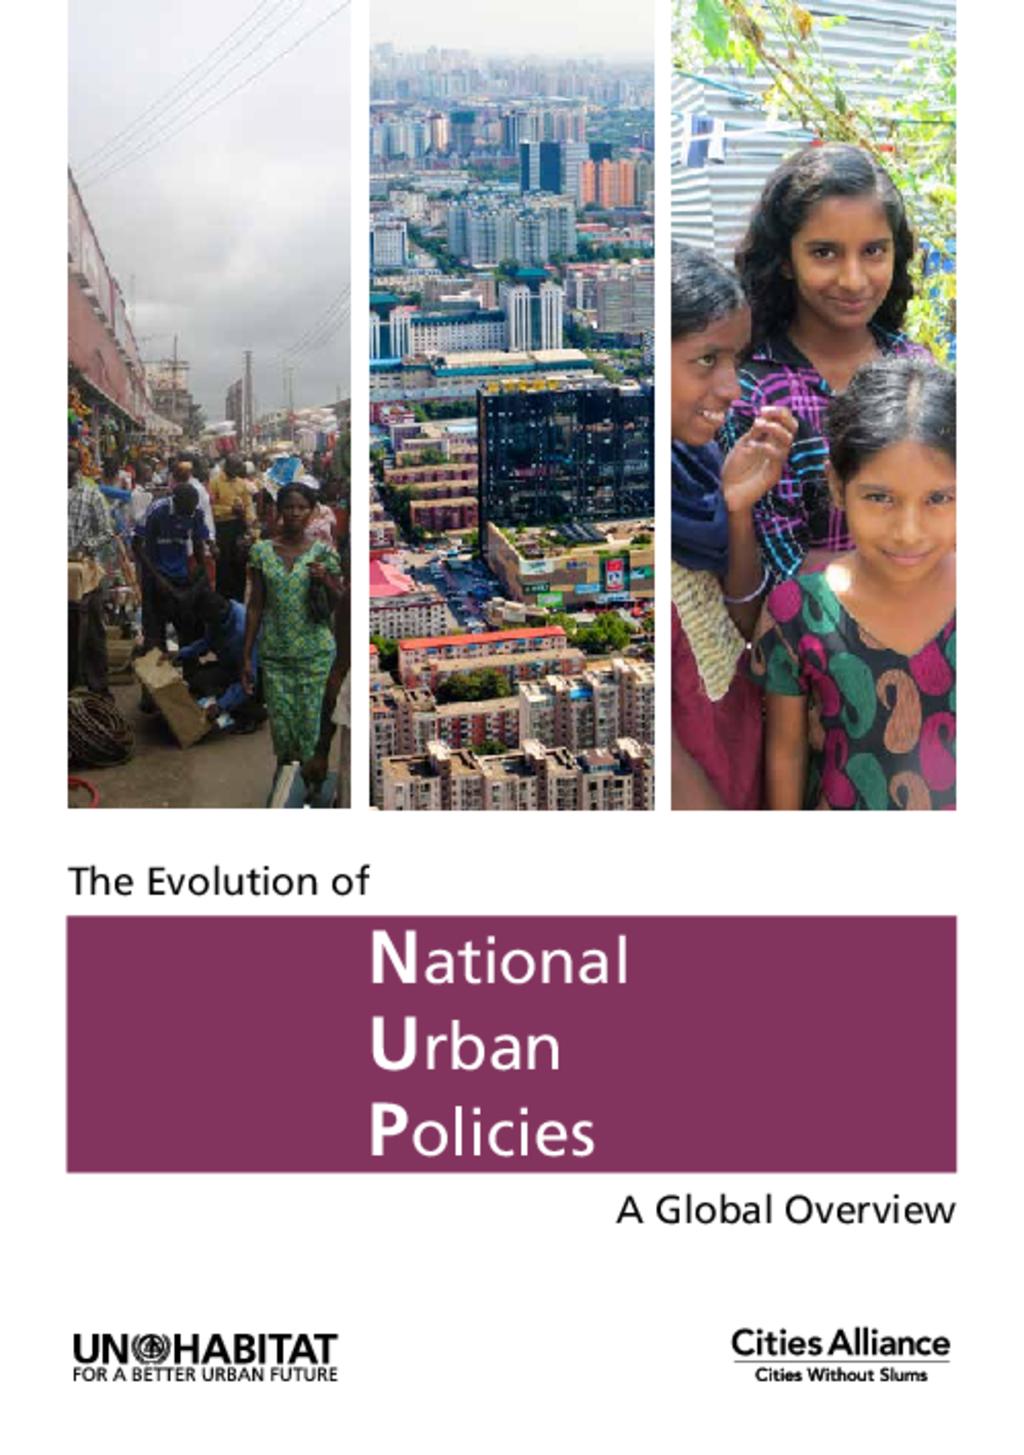 The Evolution of National Urban Policies